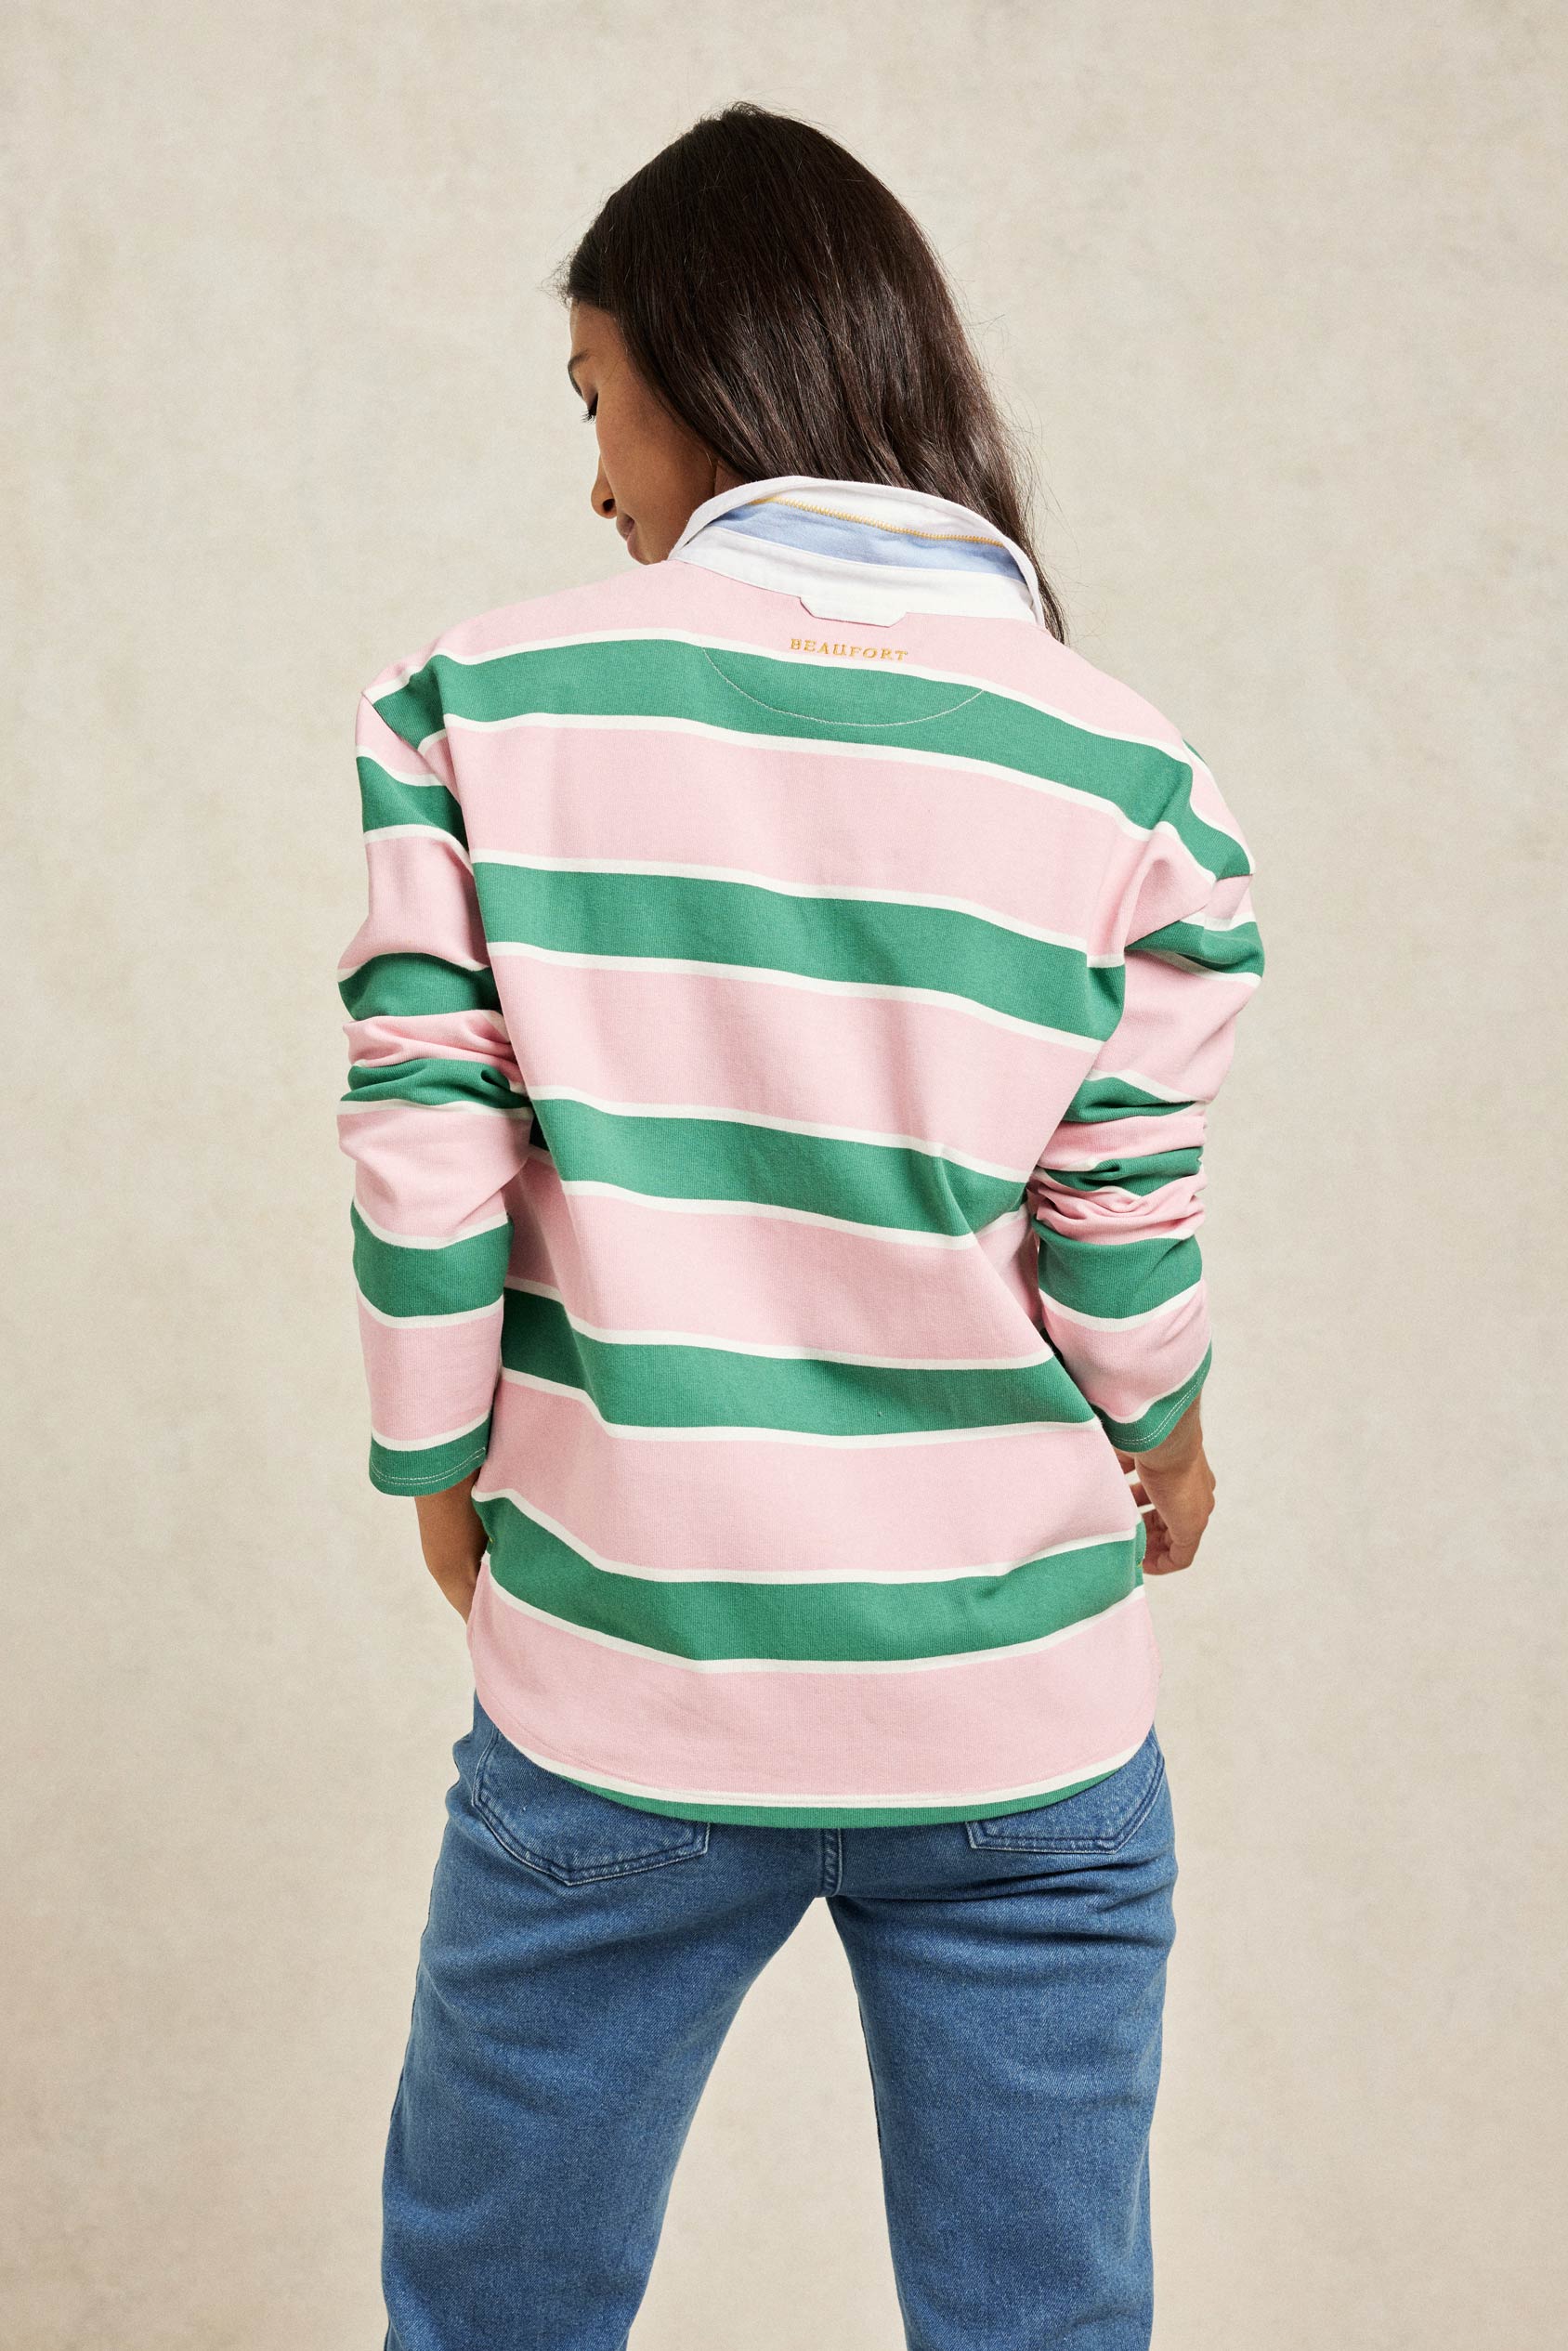 Add a splash of colour to your wardrobe with the Freesia striped rugby, cut from soft cotton. The collar and rubberised buttons add vintage appeal. Casual wear. Size XS, S, M, L, XL. Machine wash.